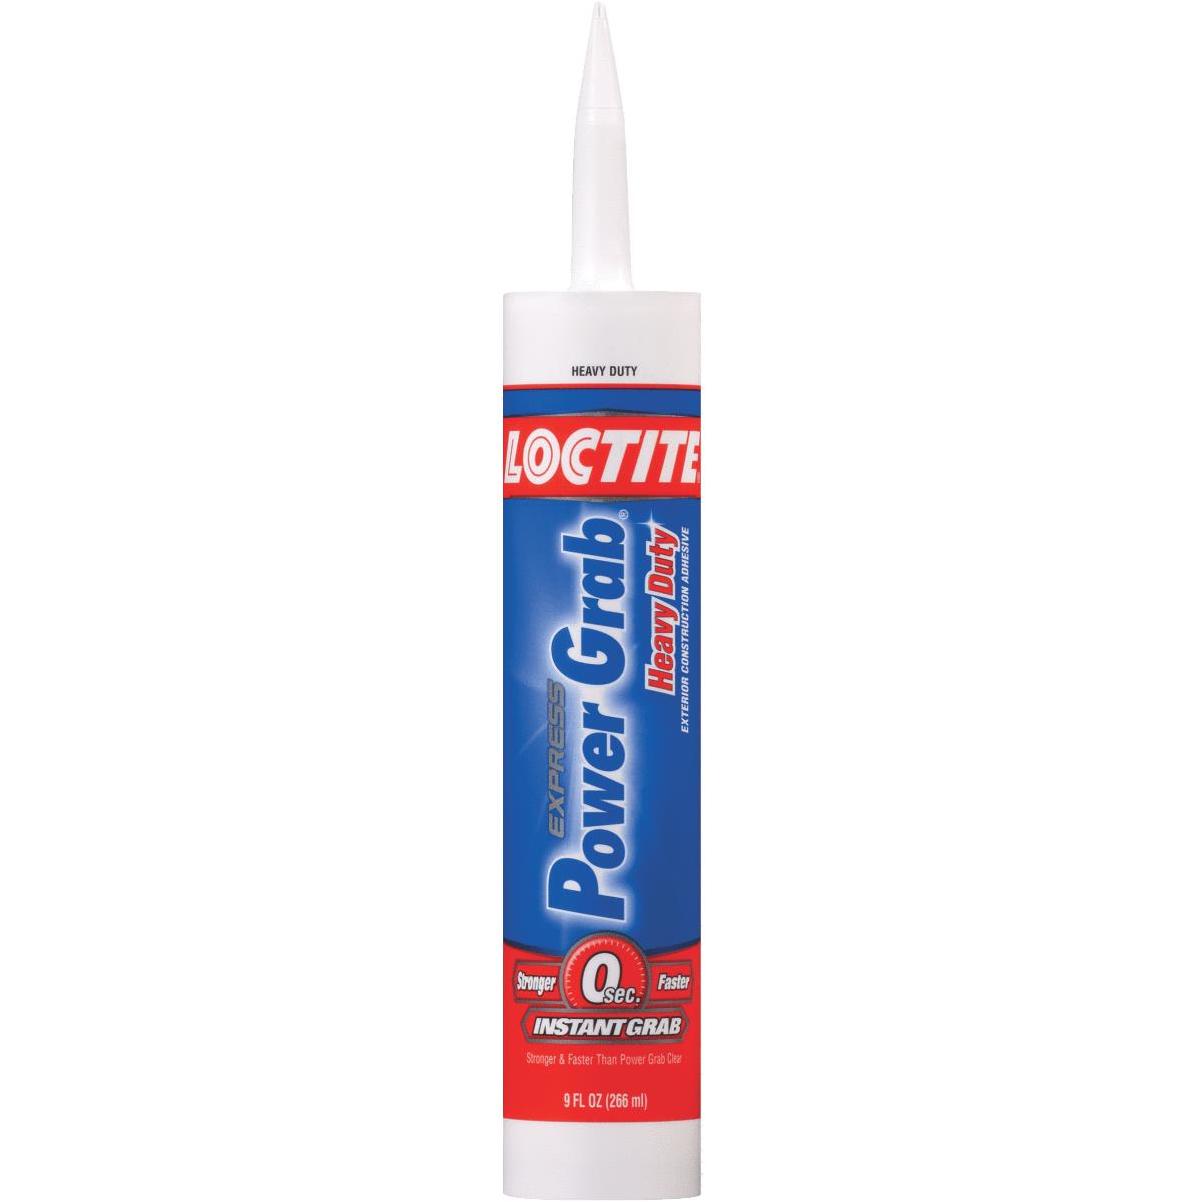 LOCTITE Power Grab Express 6 Oz. All-Purpose Construction Adhesive